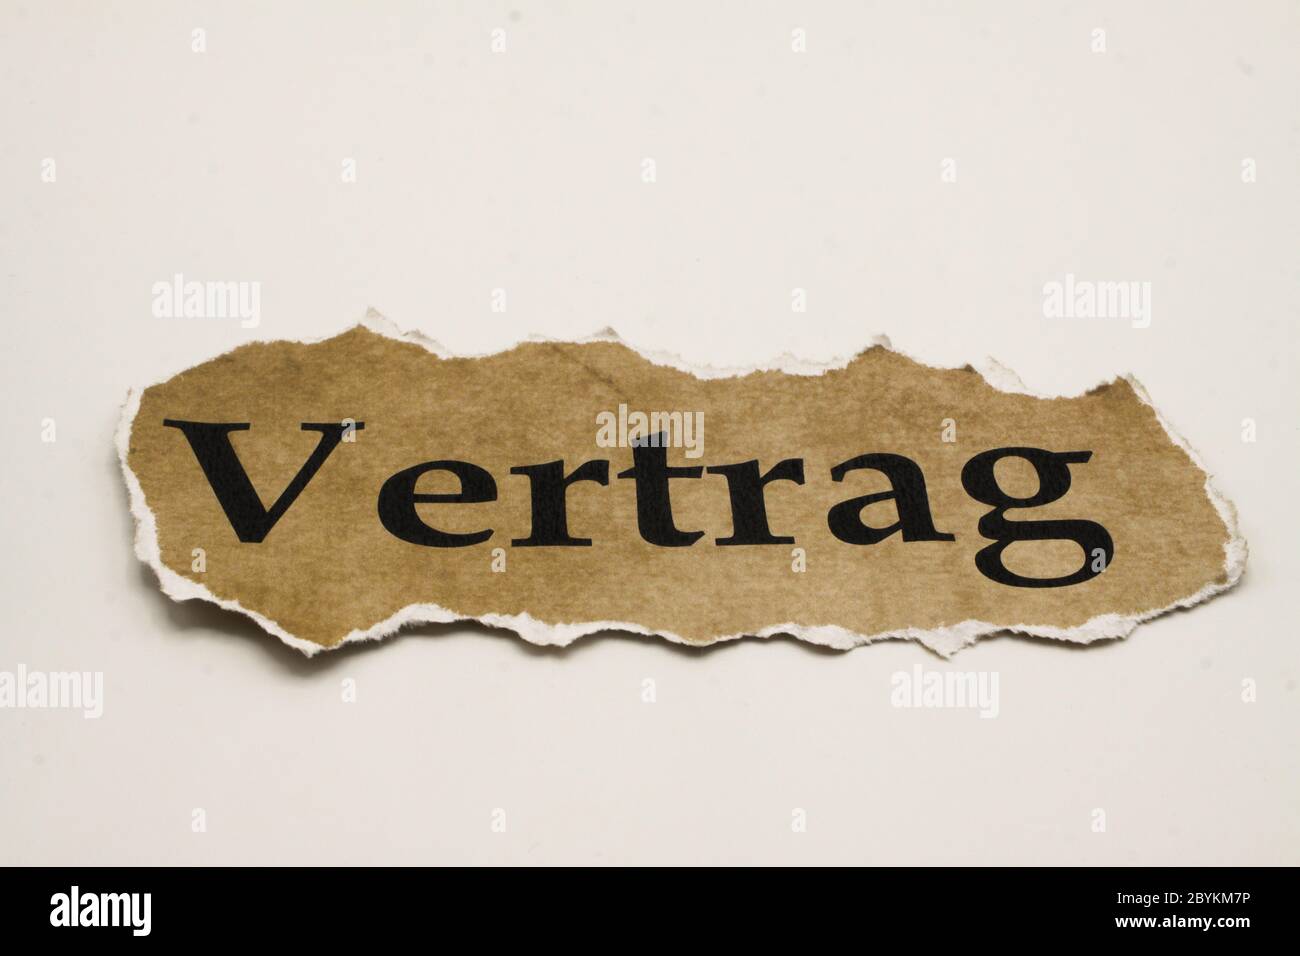 Cancelled agreement concept: Close up of isolated crumpled piece of scrap paper with word Vertrag (german word "vertrag" means contract), white backgr Stock Photo